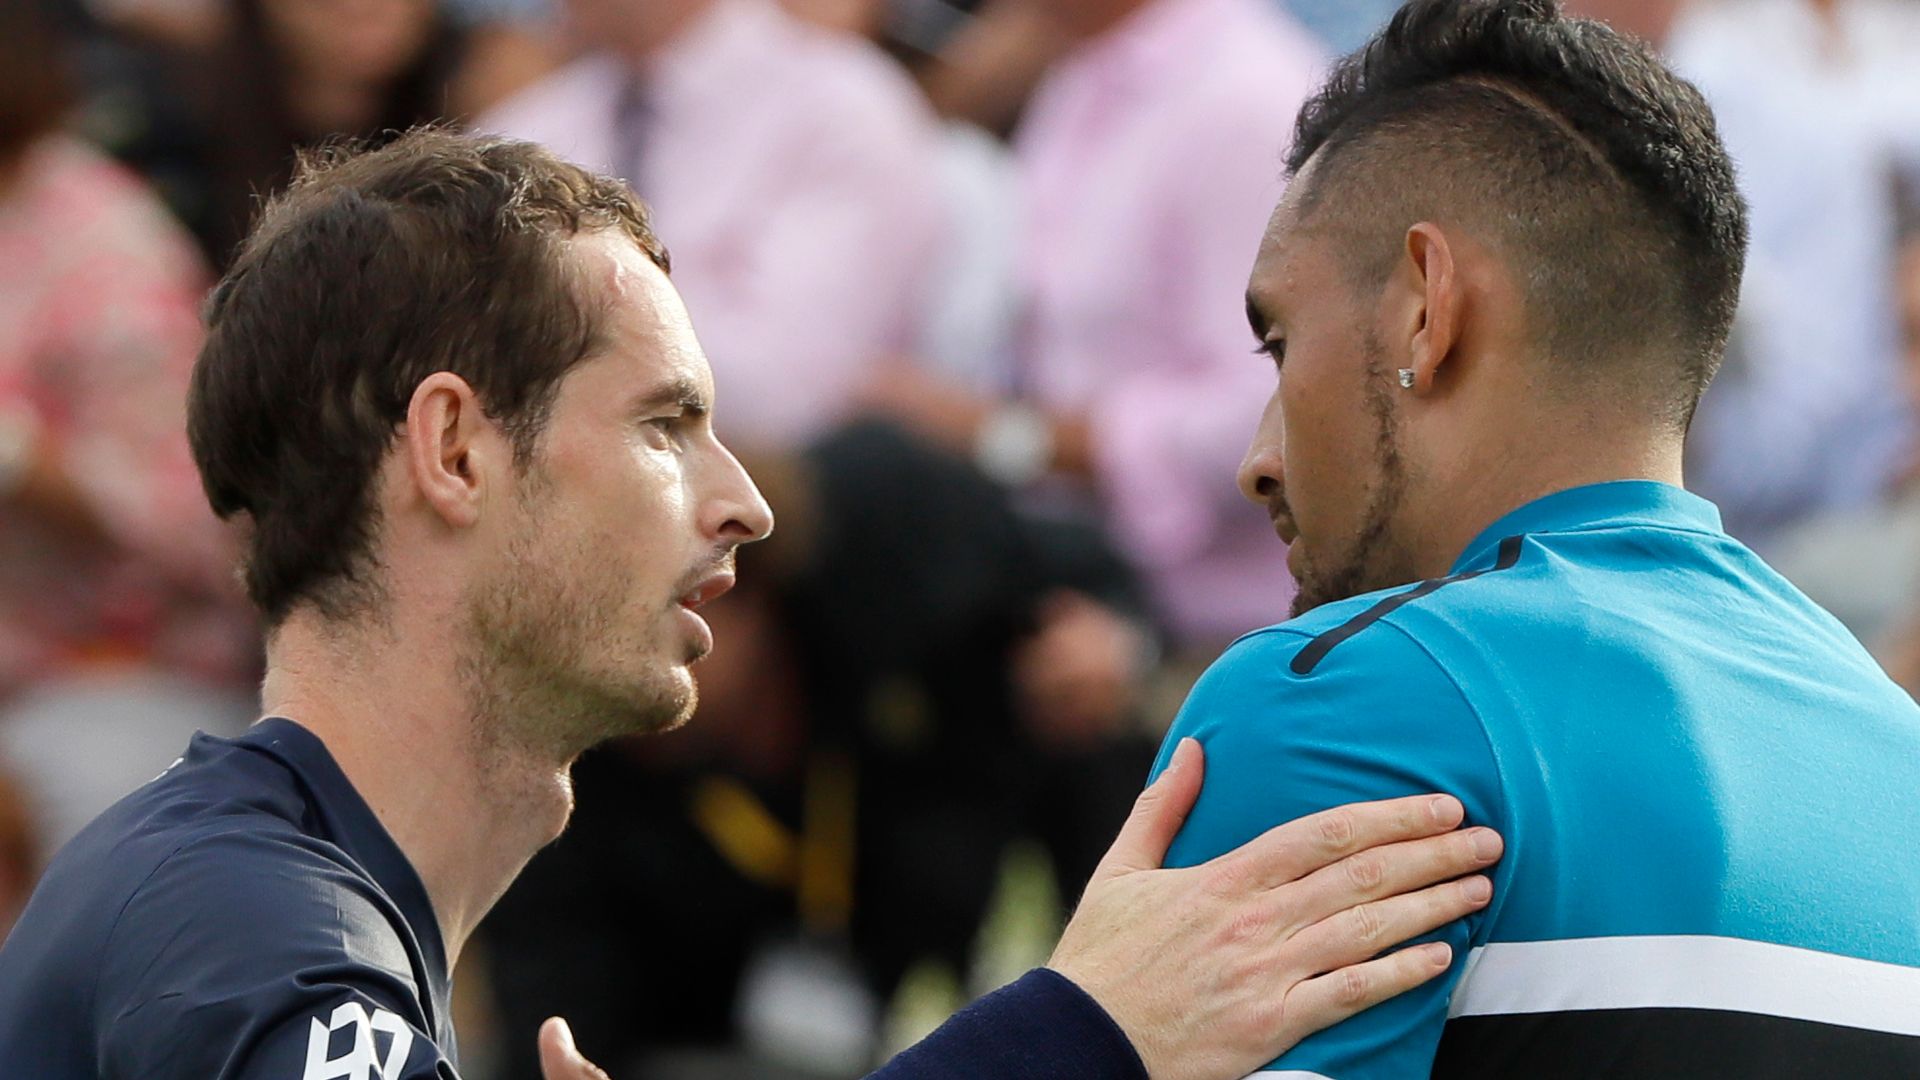 Kyrgios: Murray tried to help me after spotting signs of self-harm